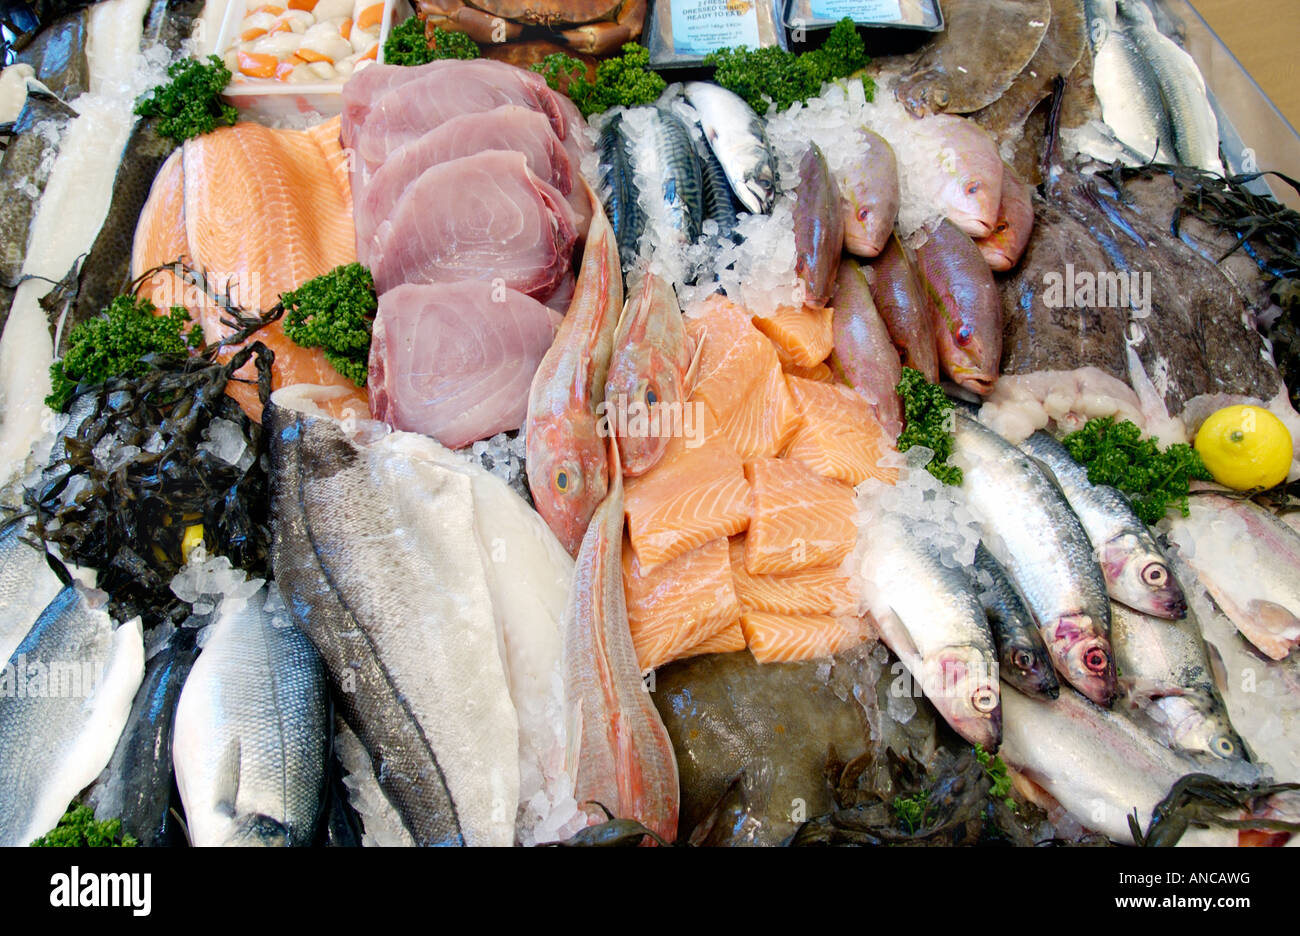 Selection of sea fish for sale at Abergavenny Food Festival Monmouthshire South Wales UK EU Stock Photo